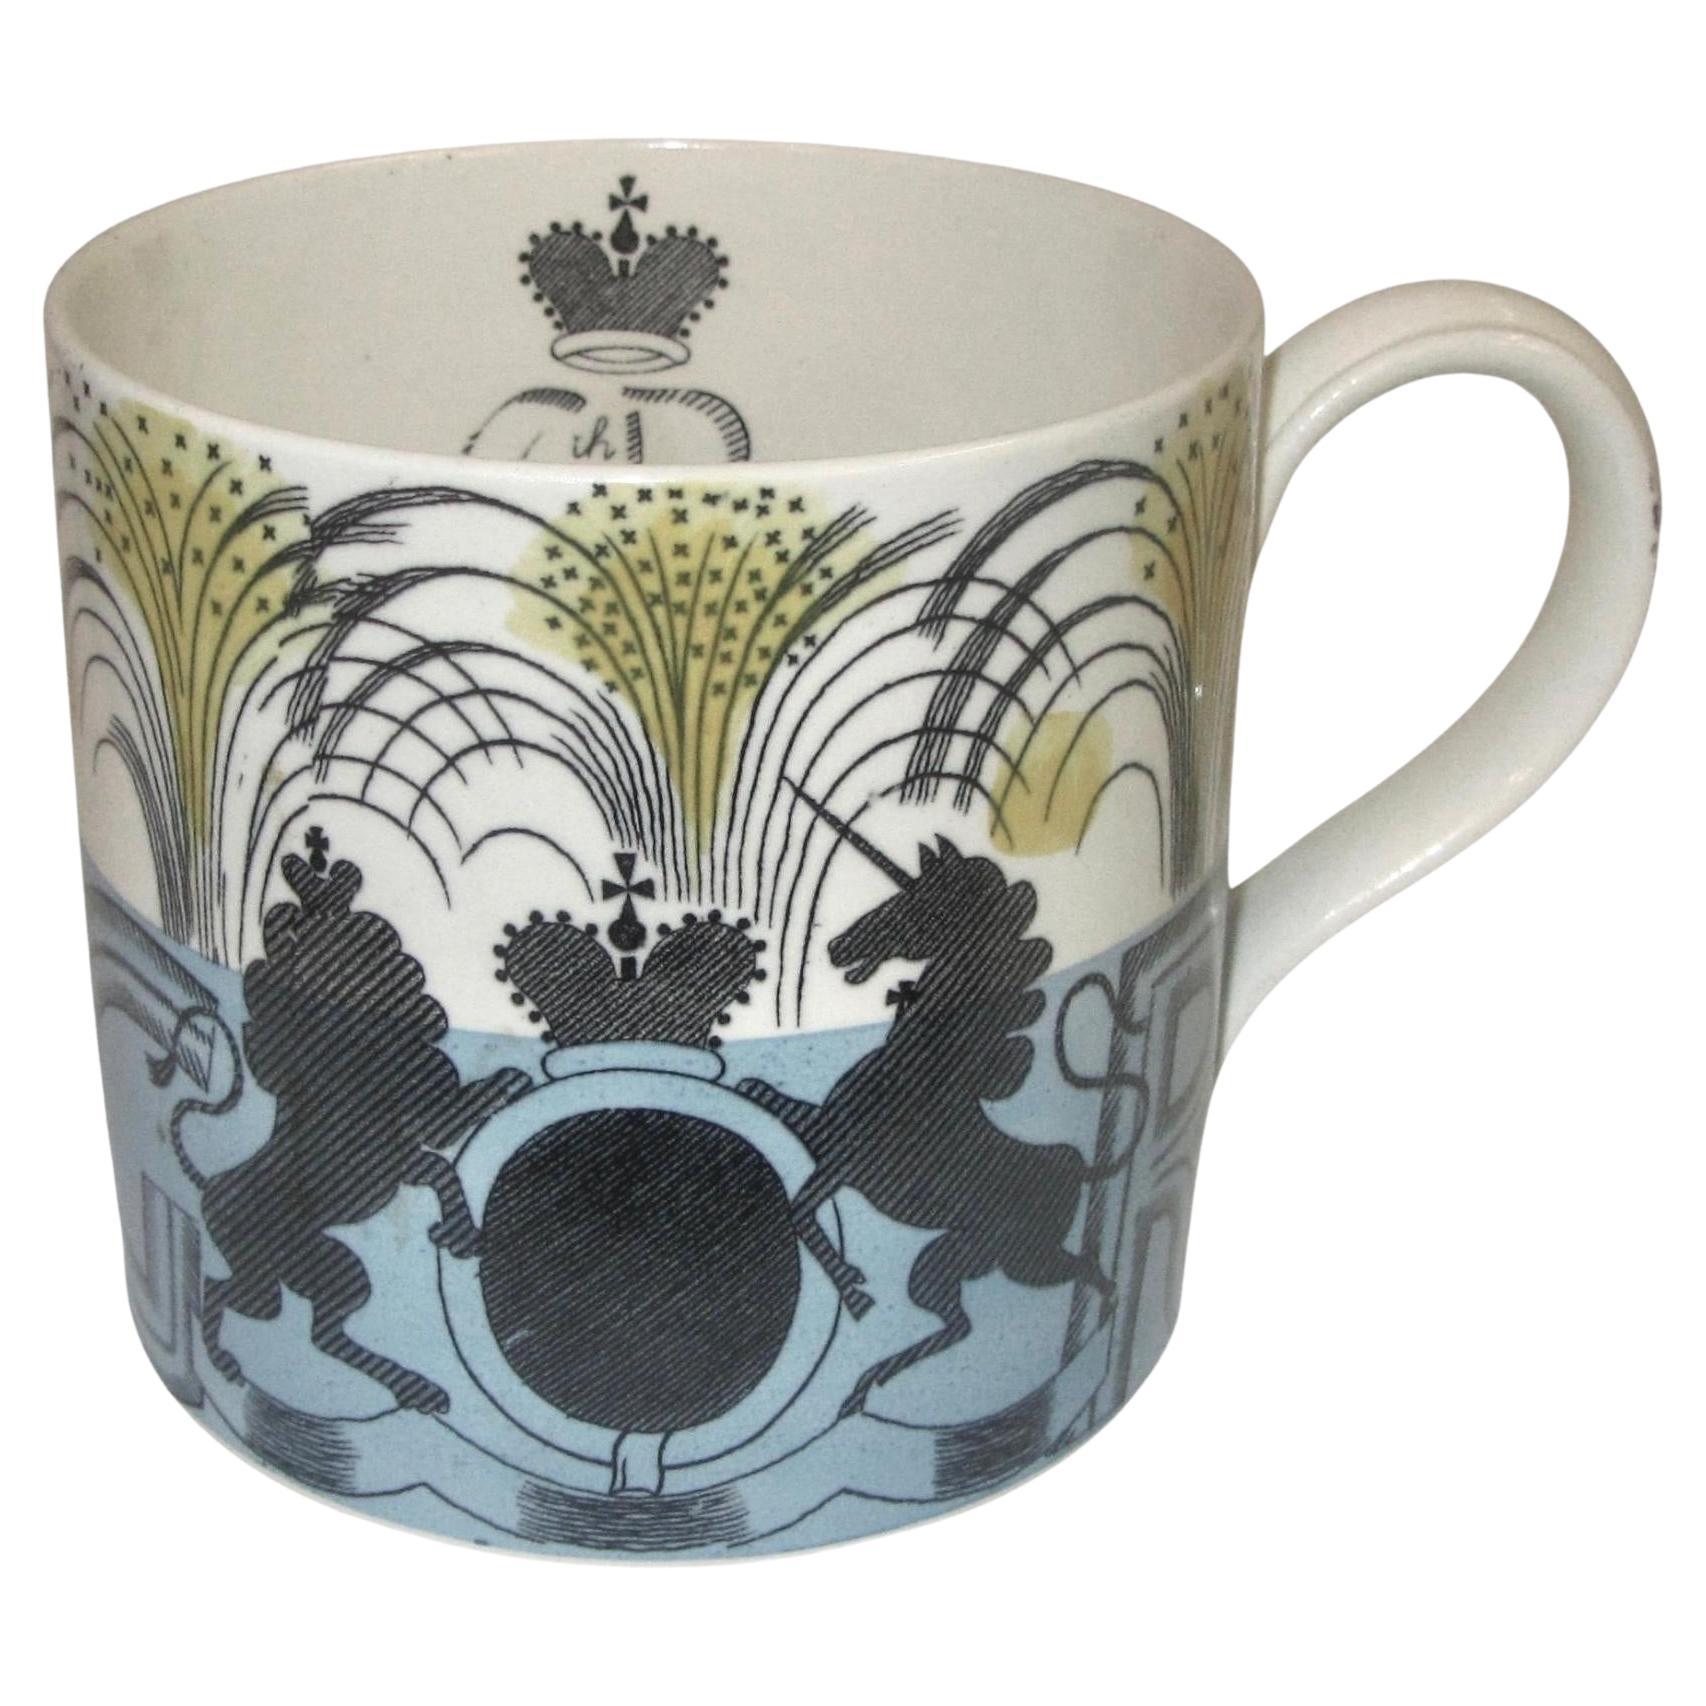 Wedgwood Mug Commemorating the Coronation of King George VI and Queen Elizabeth